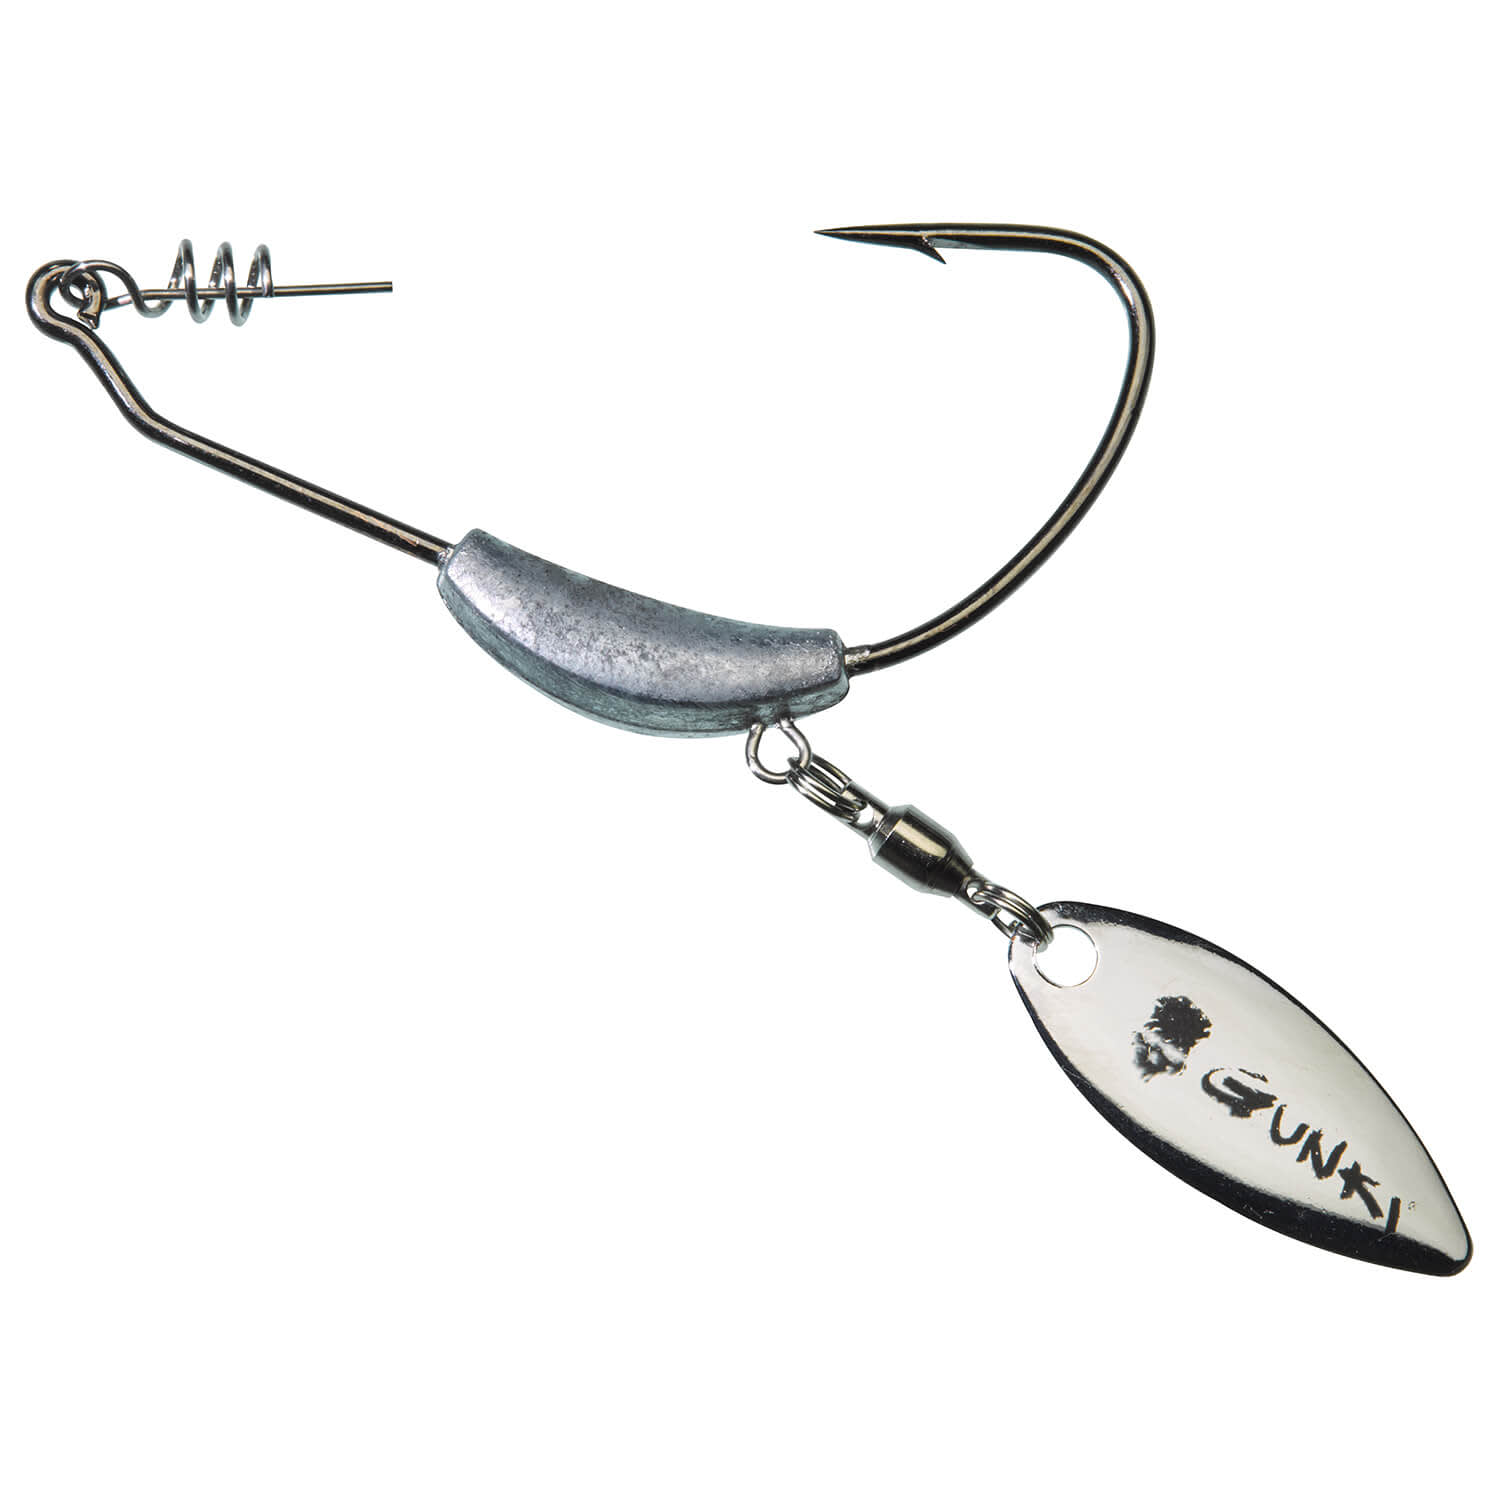 Gunki Flash Texas Offset Hook Weighted with Spinner Blade buy by